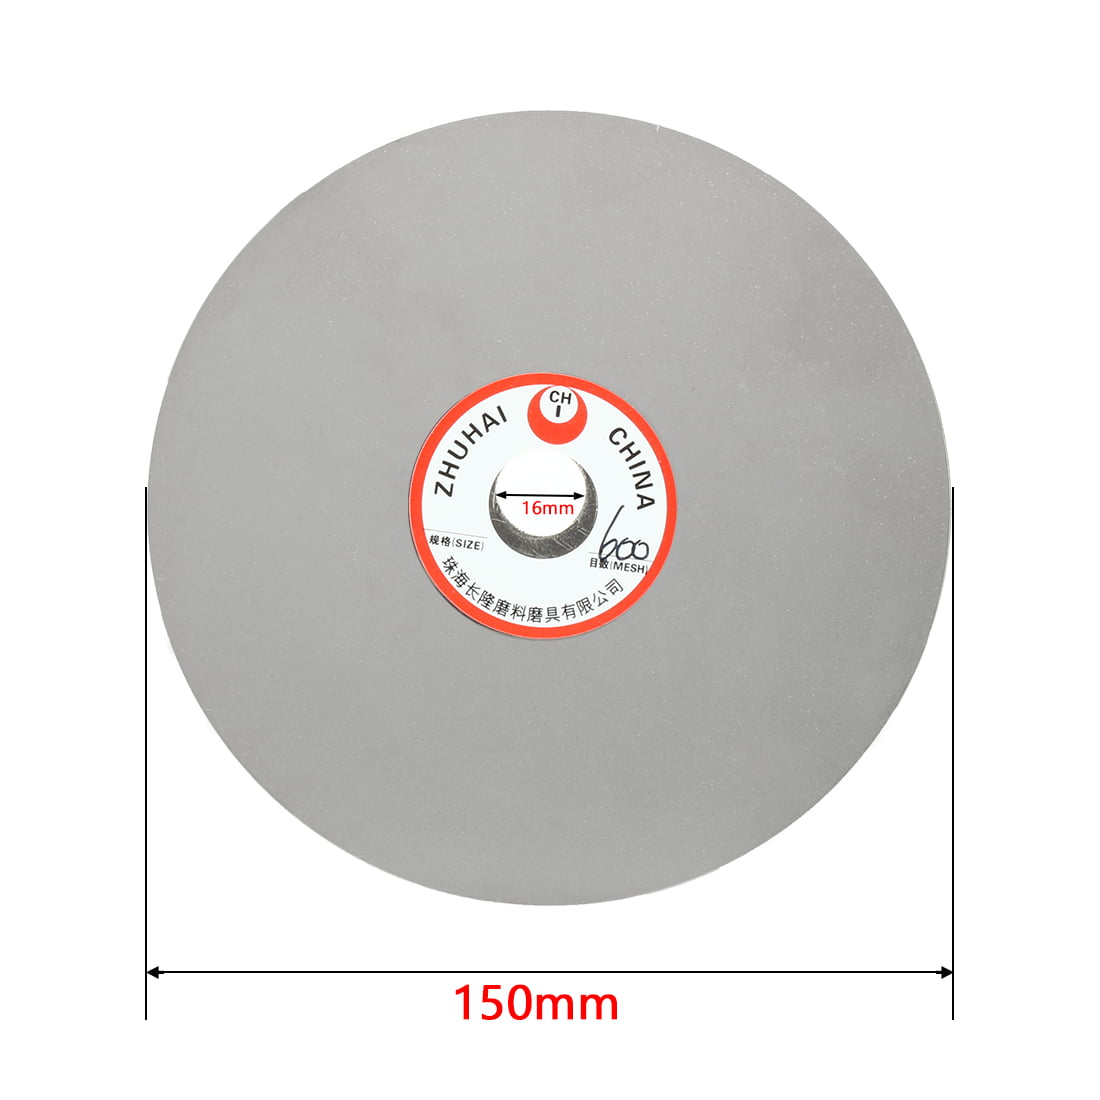 Details about   6'' 150mm Diamond Coated Flat Lap Wheel Polishing Grinding Disc 60-3000 Grit